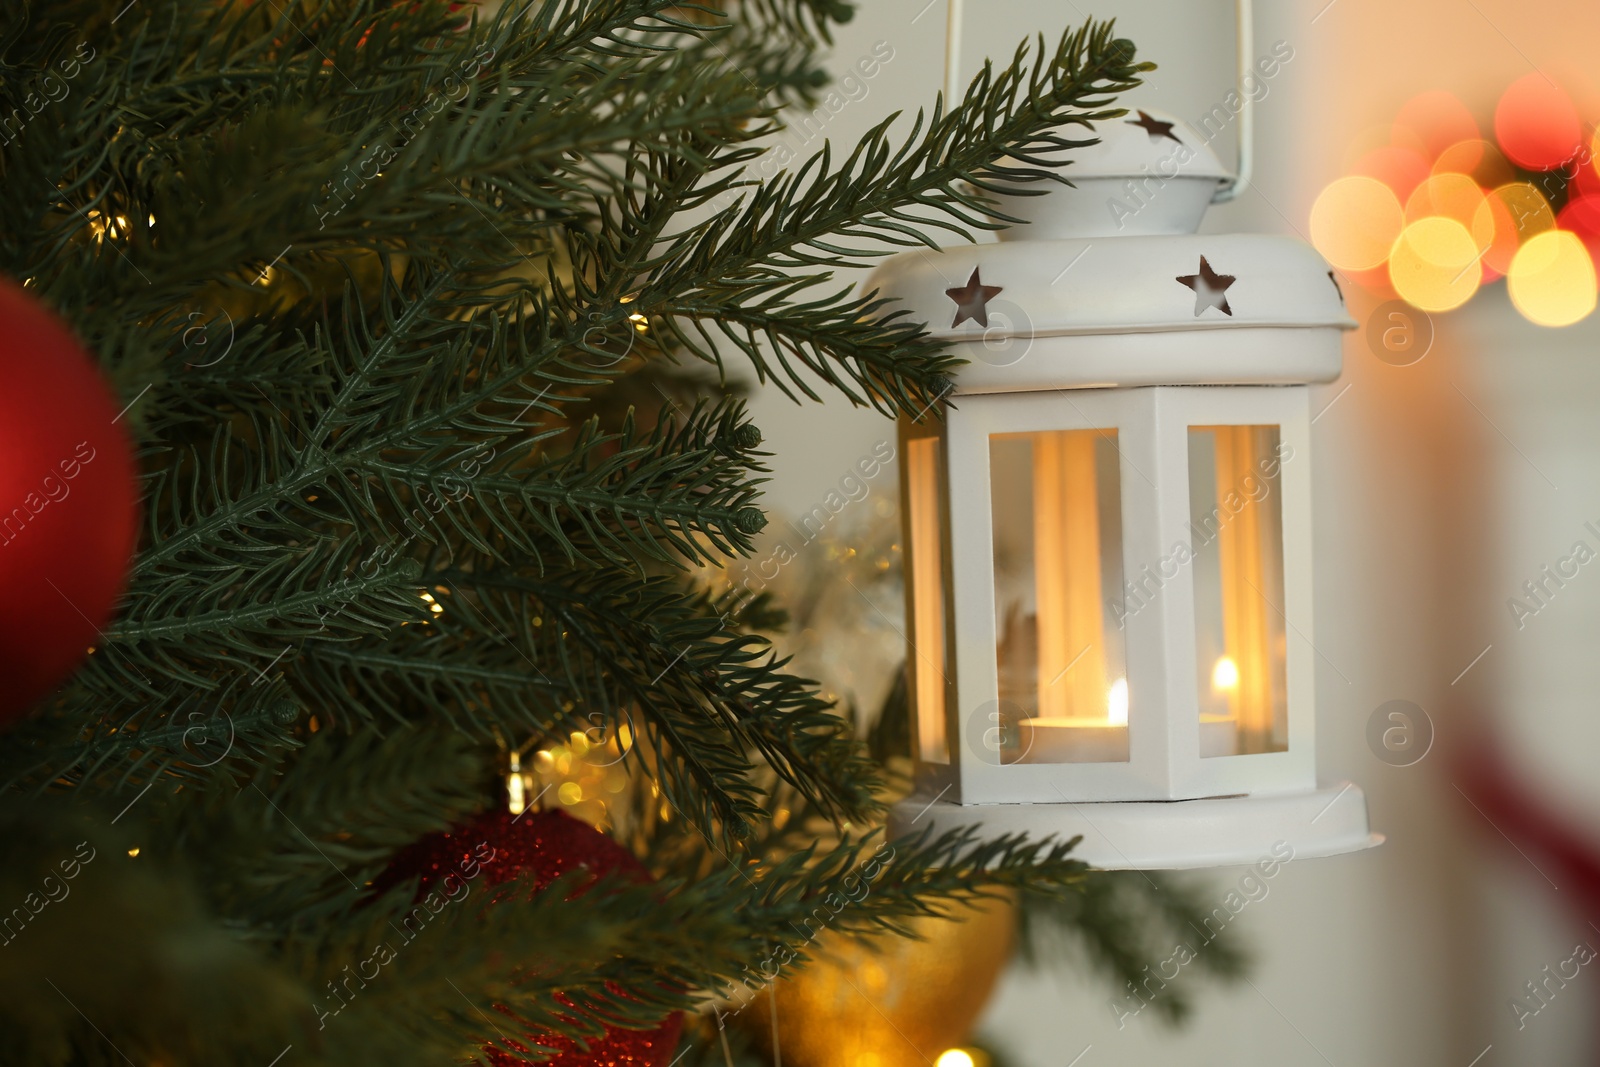 Photo of Christmas lantern with burning candle on fir tree indoors, closeup